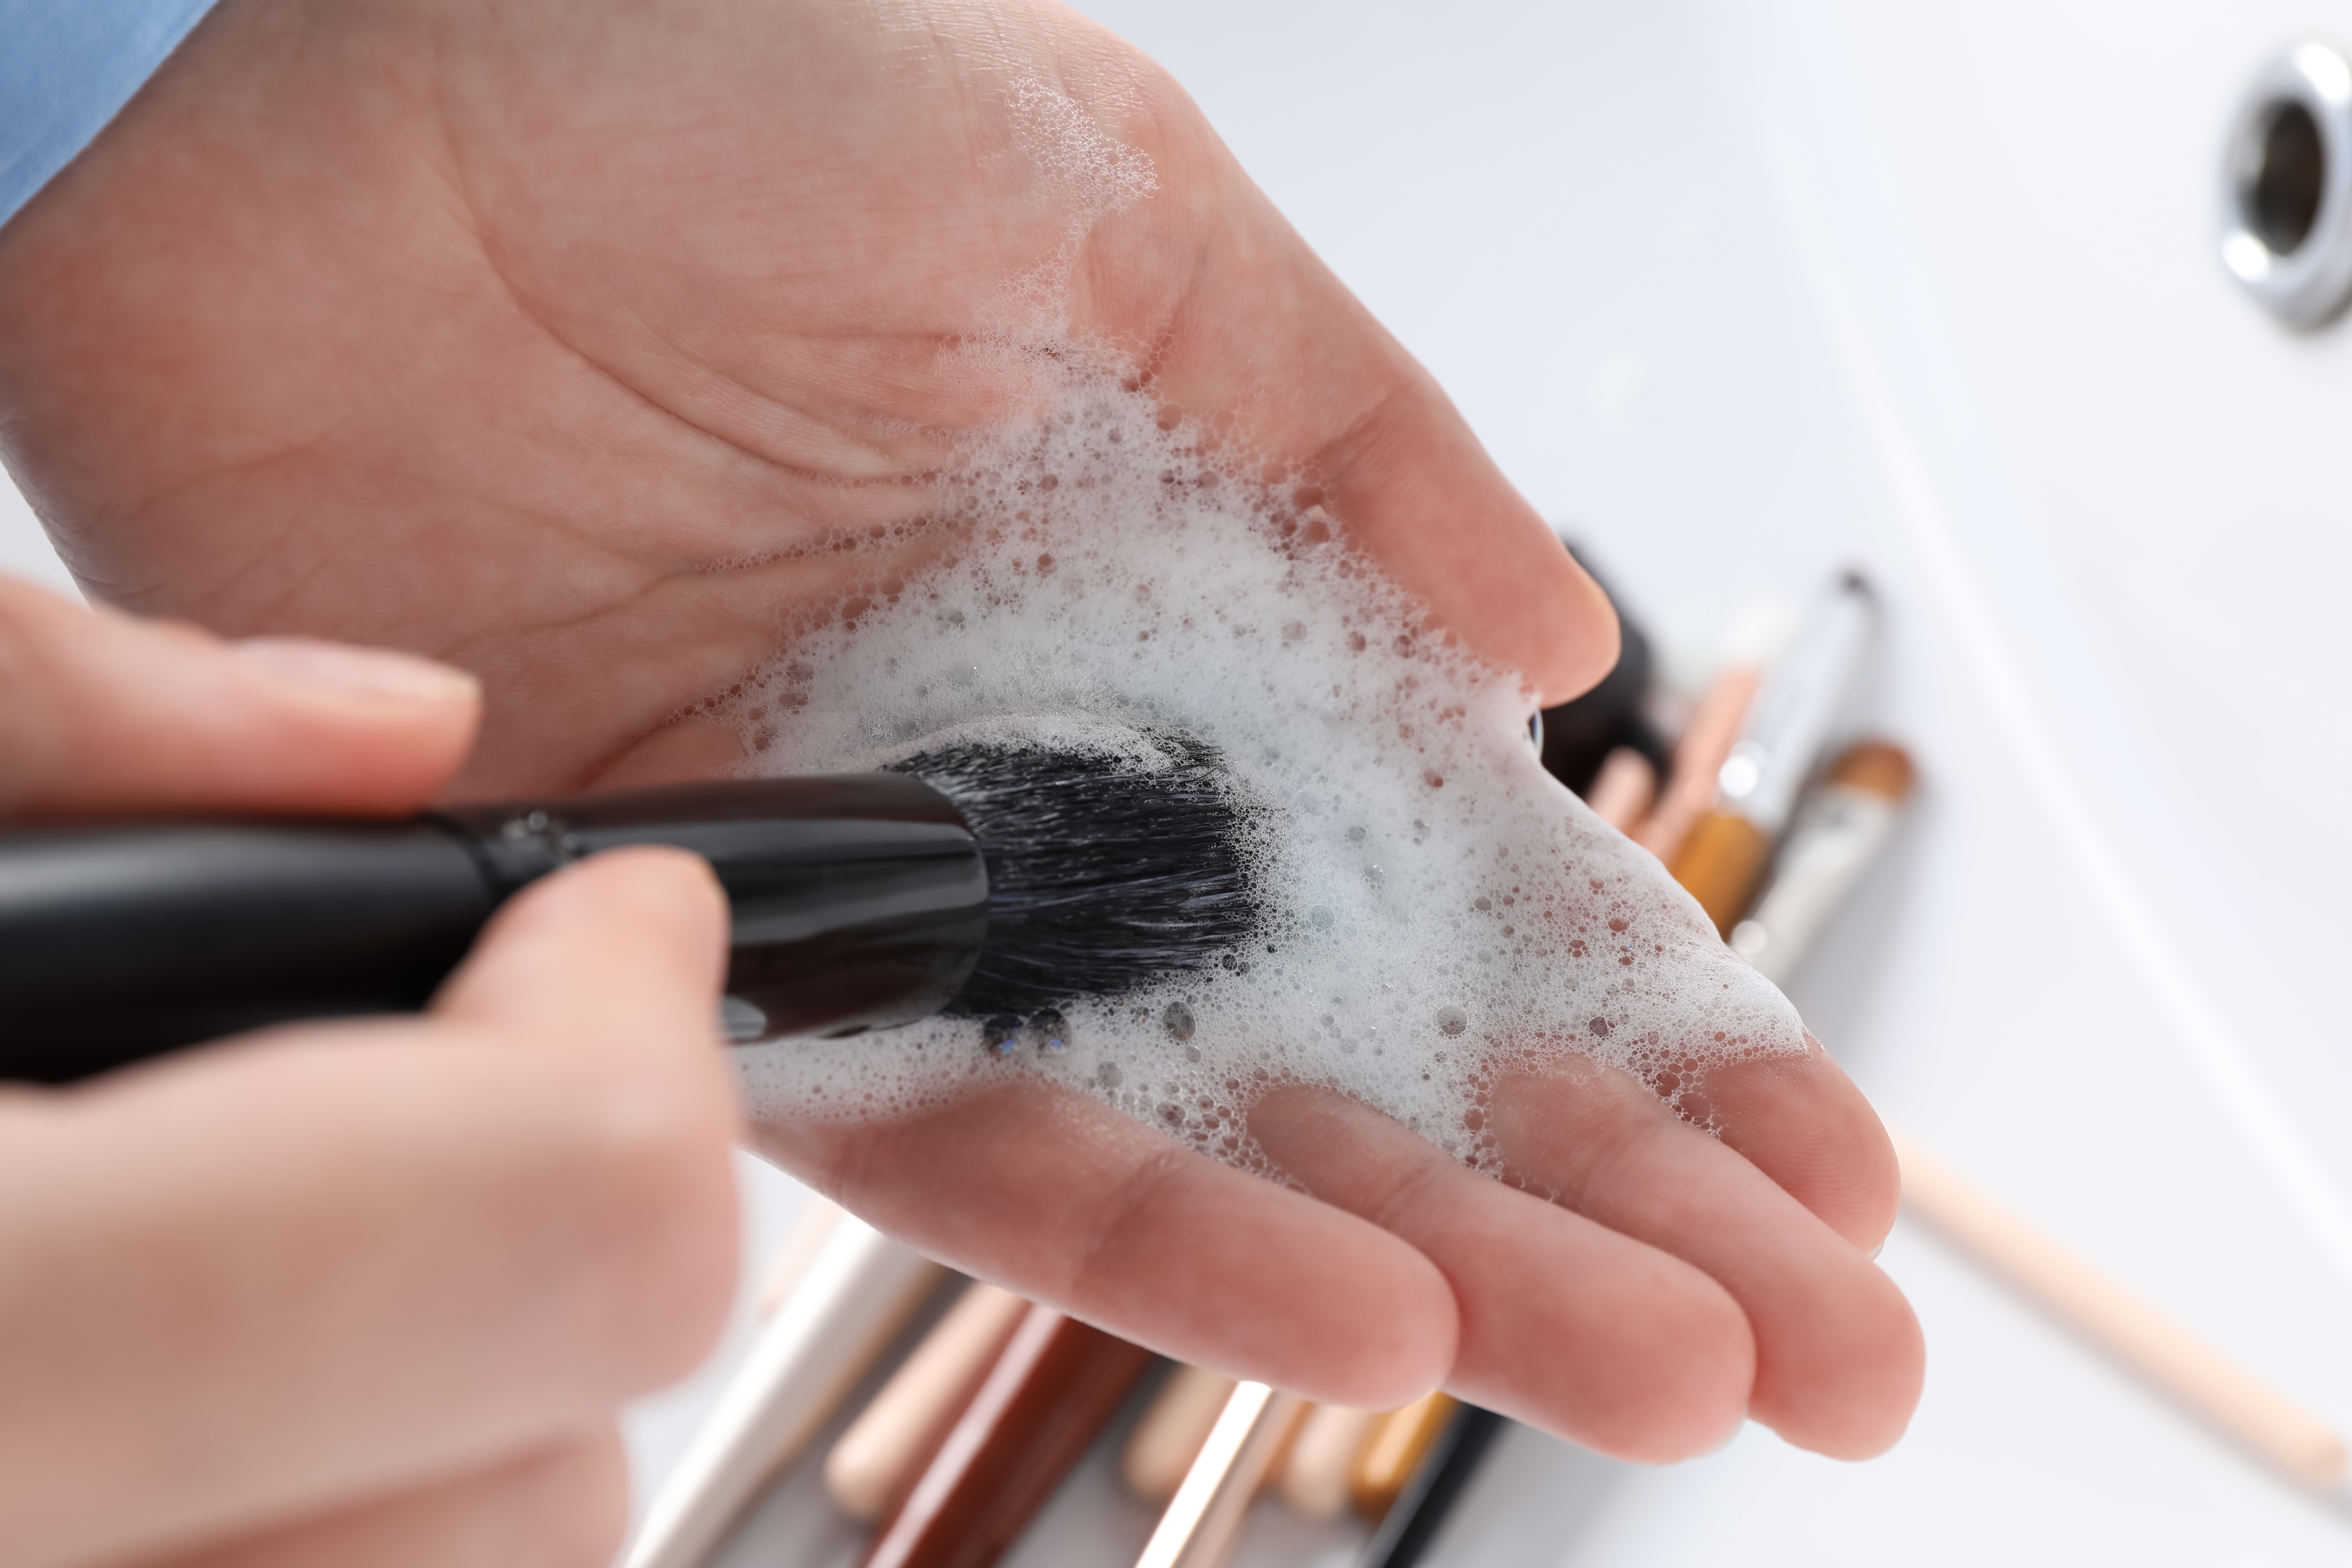 A close-up photo of a person washing their makeup brushes | Source: Shutterstock